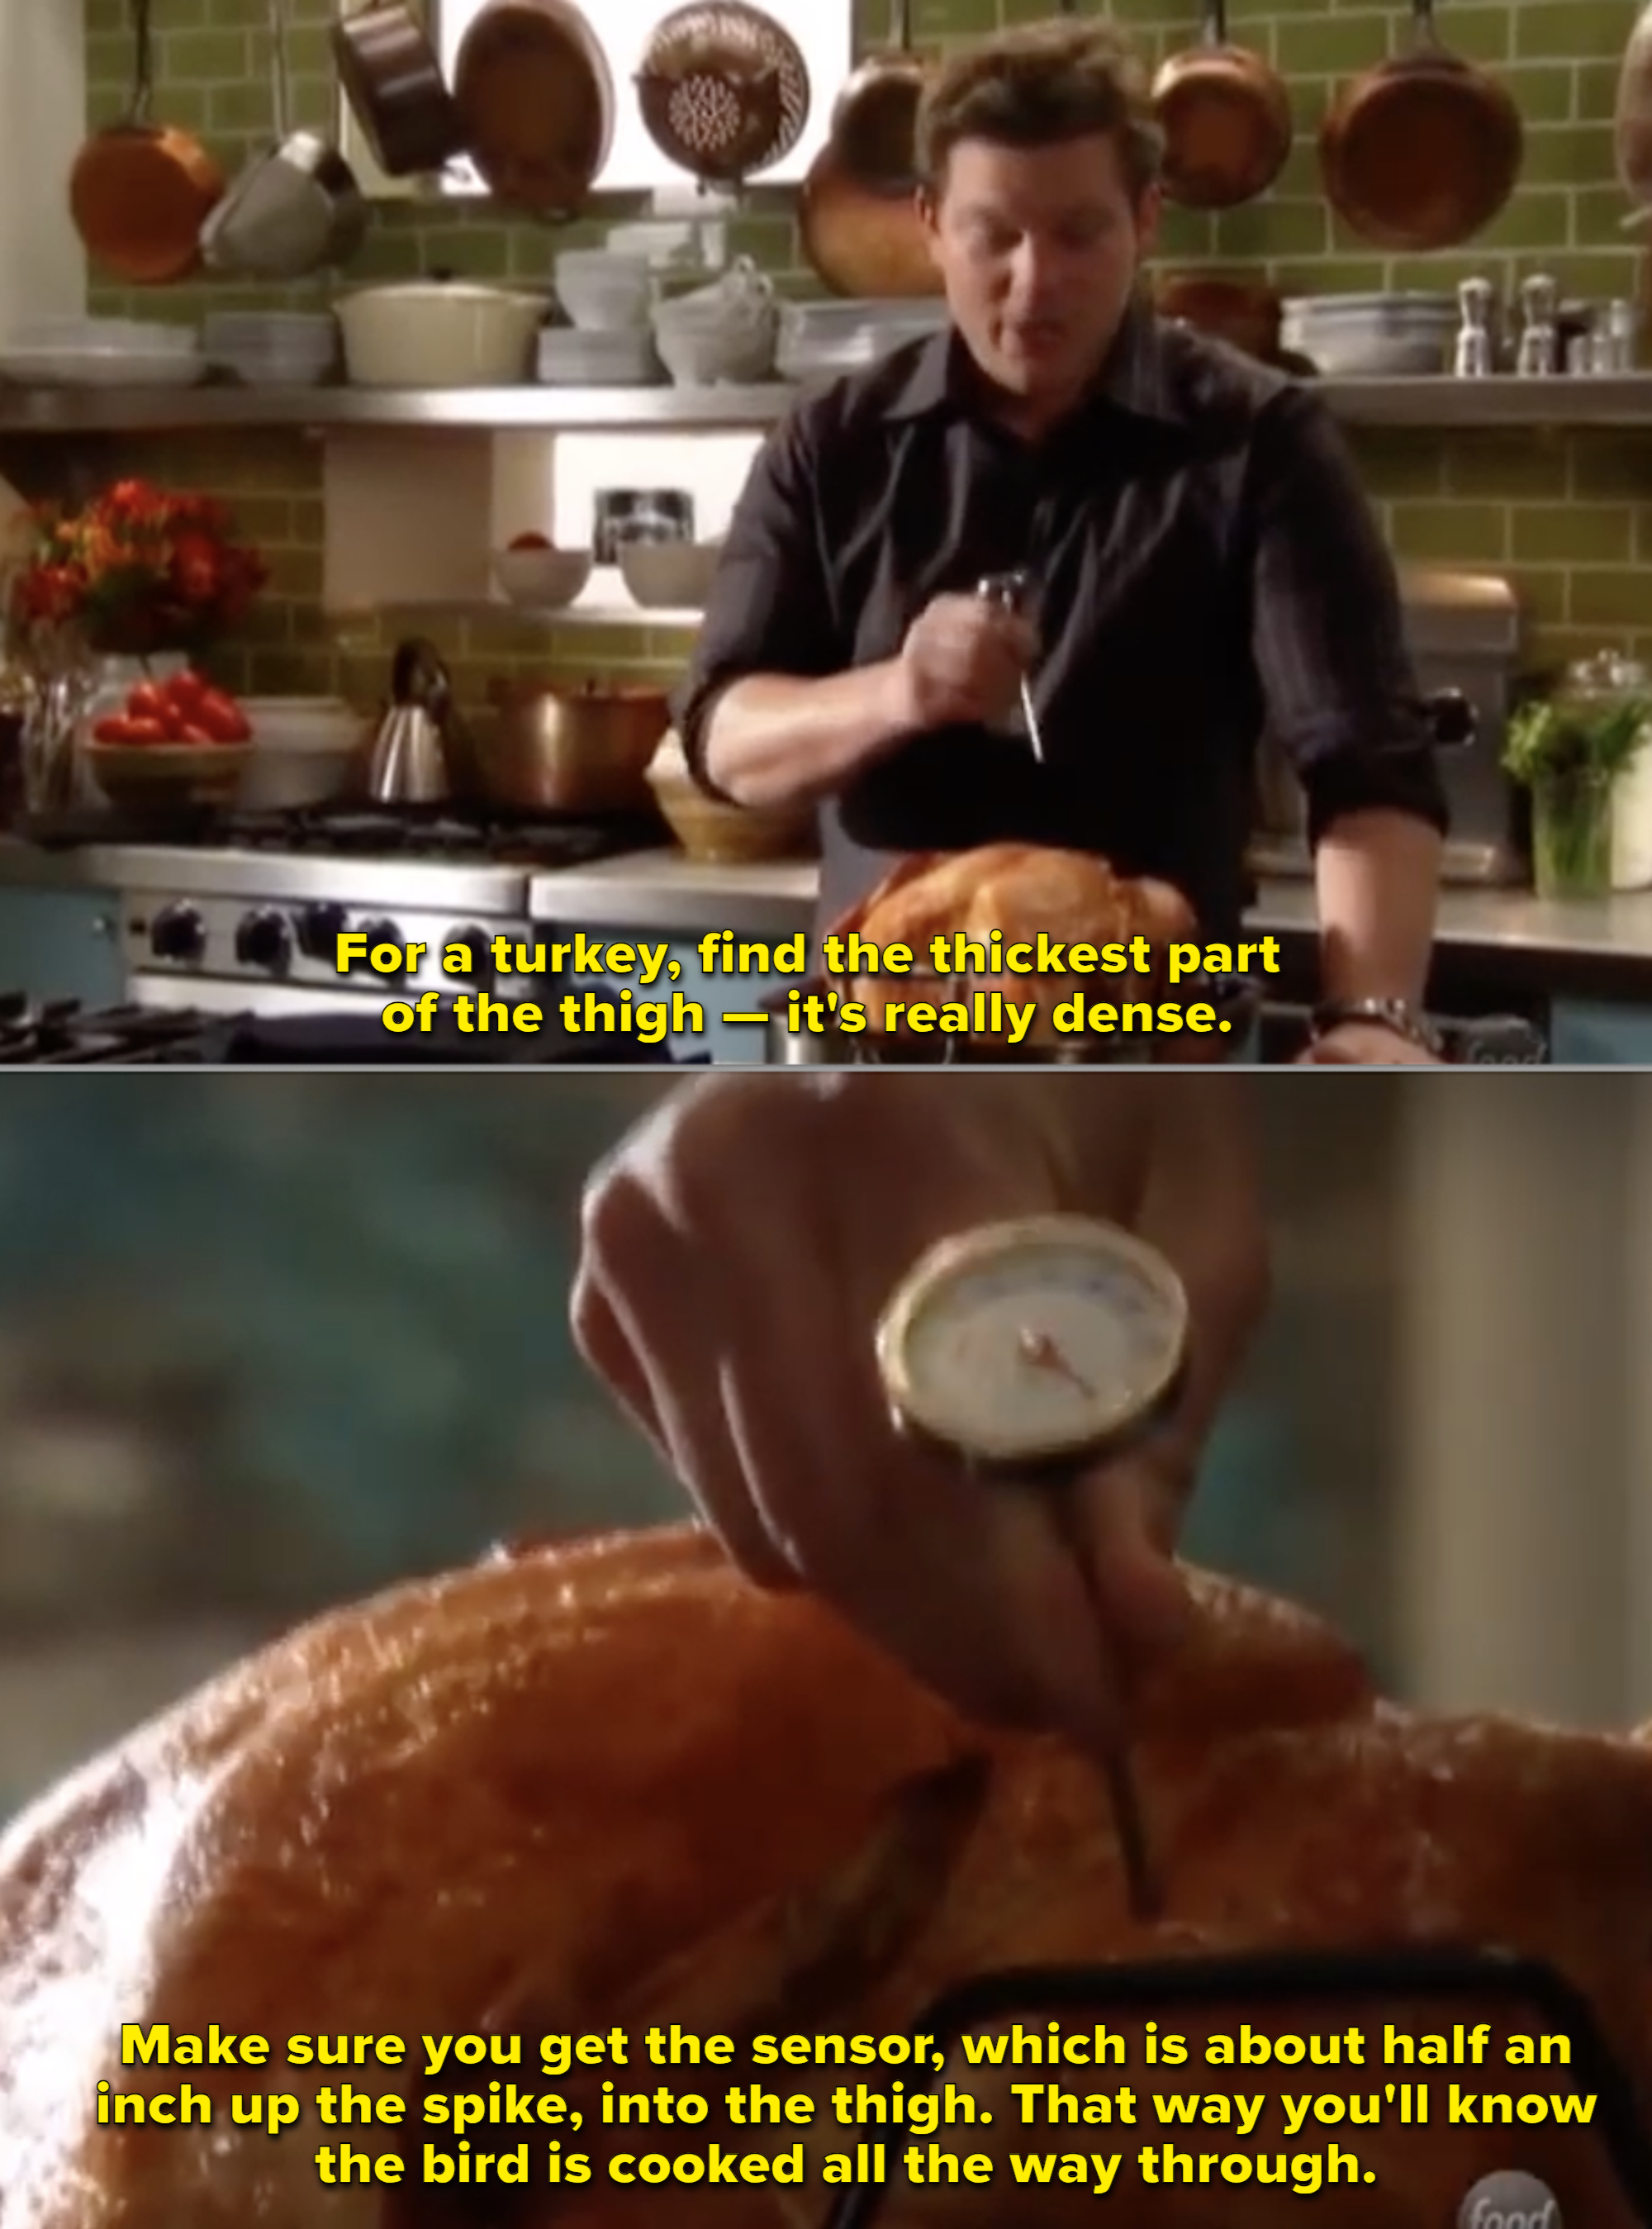 Tyler Florence cooking a turkey and saying to find the thickest part of the thigh and &quot;make sure you get the sensor, which is about half an inch up the spike, into the thigh; that way you&#x27;ll know the bird is cooked all the way through&quot;